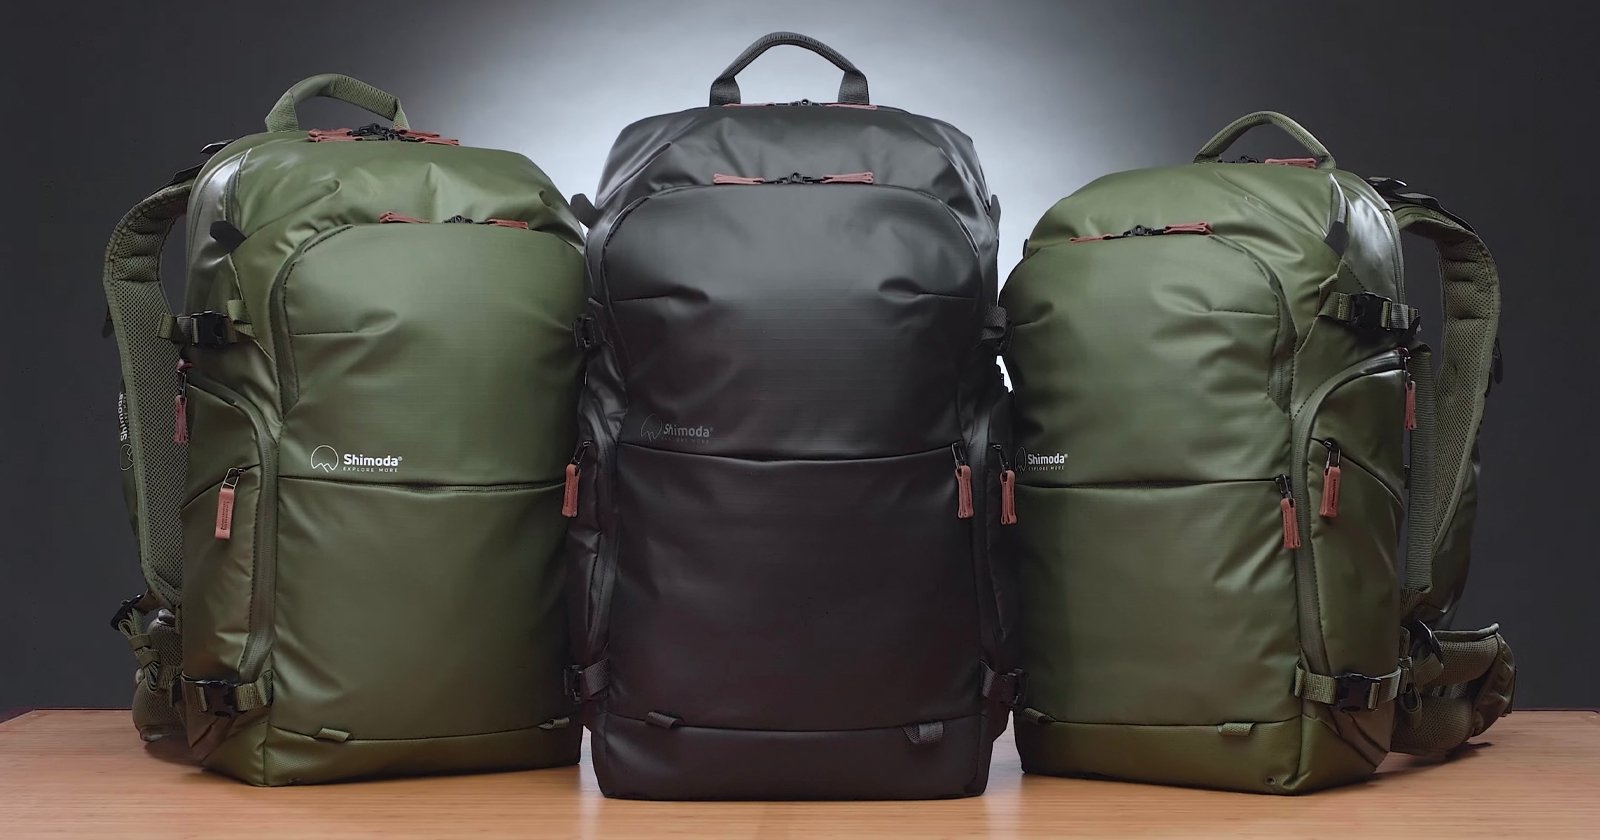 Shimoda Launches New Travel Backpacks Designed for Carry-On